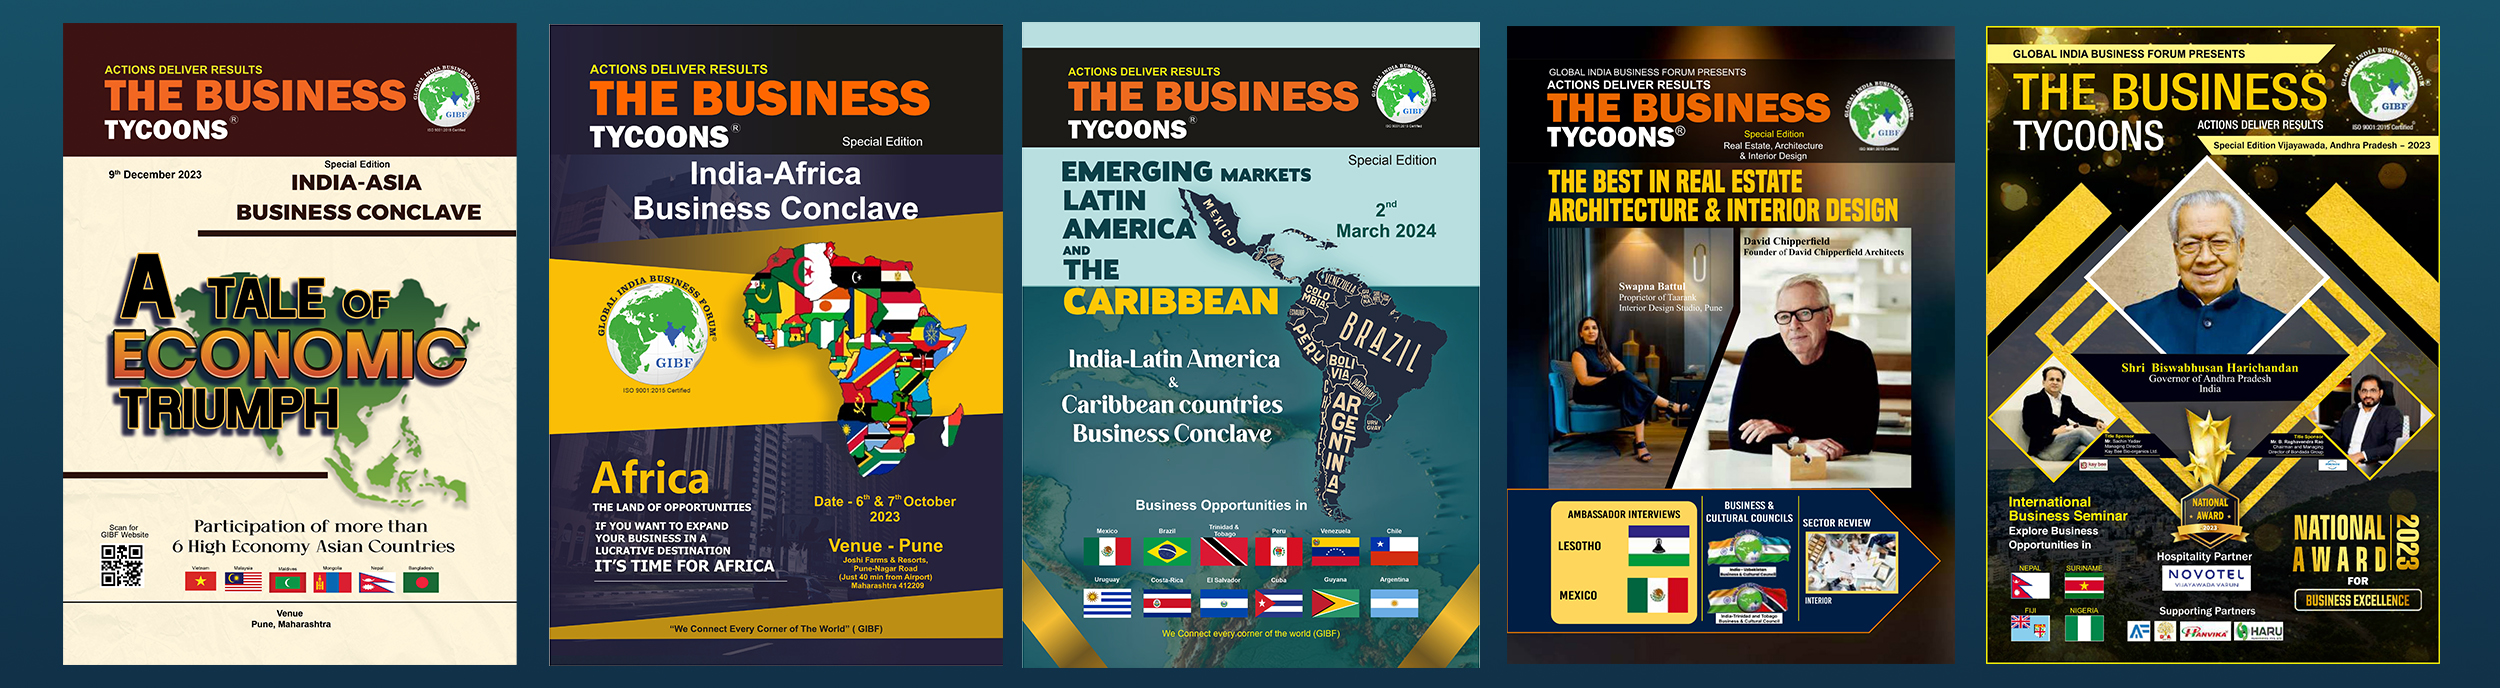 the-business-tycoons-emerging-markets-latin-america-and-the-caribbean-all-silder